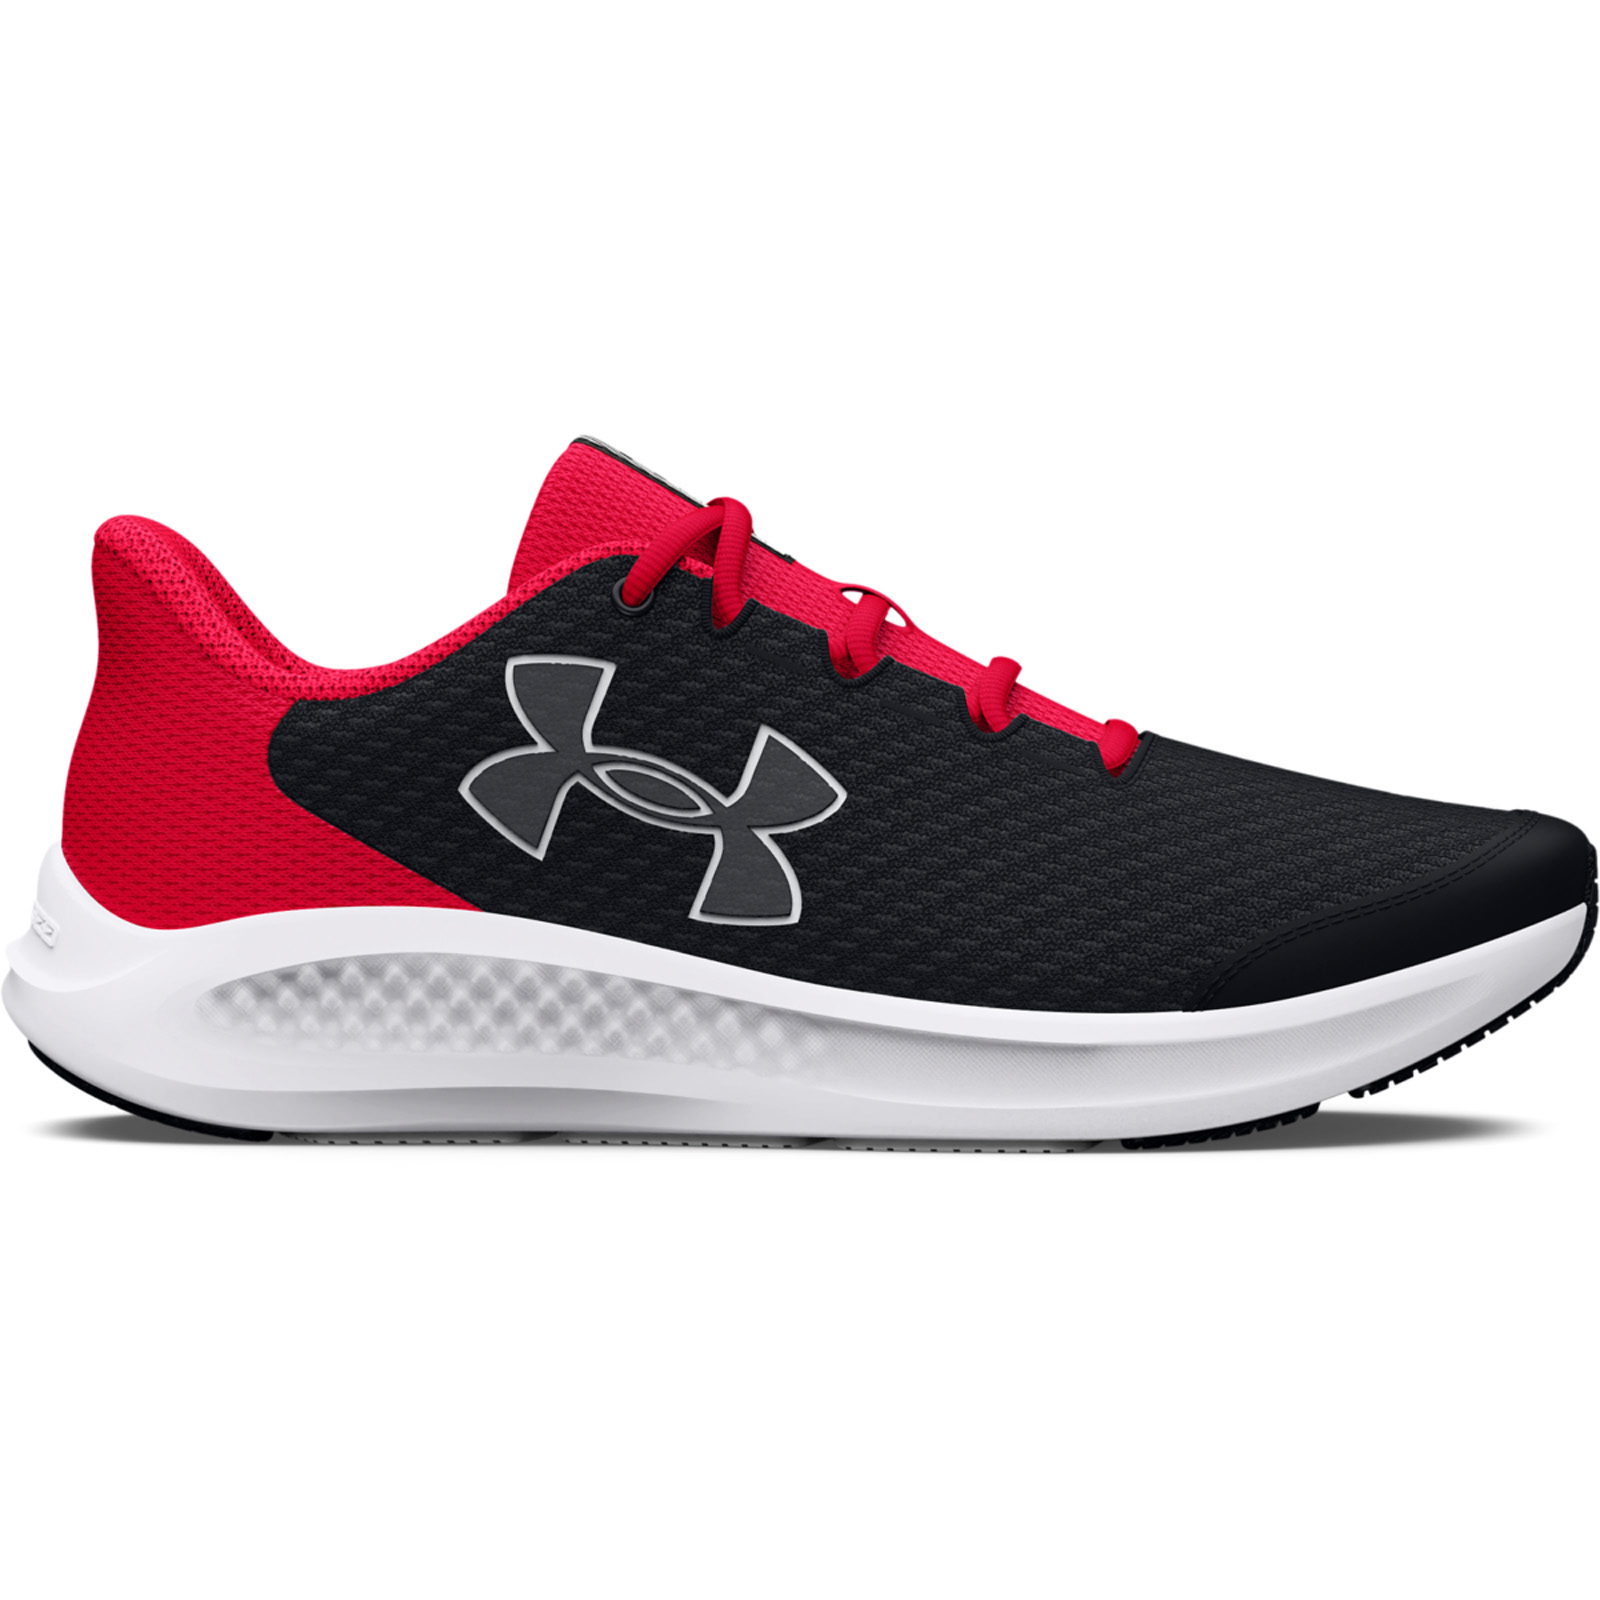 Under Armour - Boys' Grade School UA Charged Pursuit 3 Big Logo Running Shoes - Black/Red/White Παιδικά > Παπούτσια > Αθλητικά > Παπούτσι Low Cut